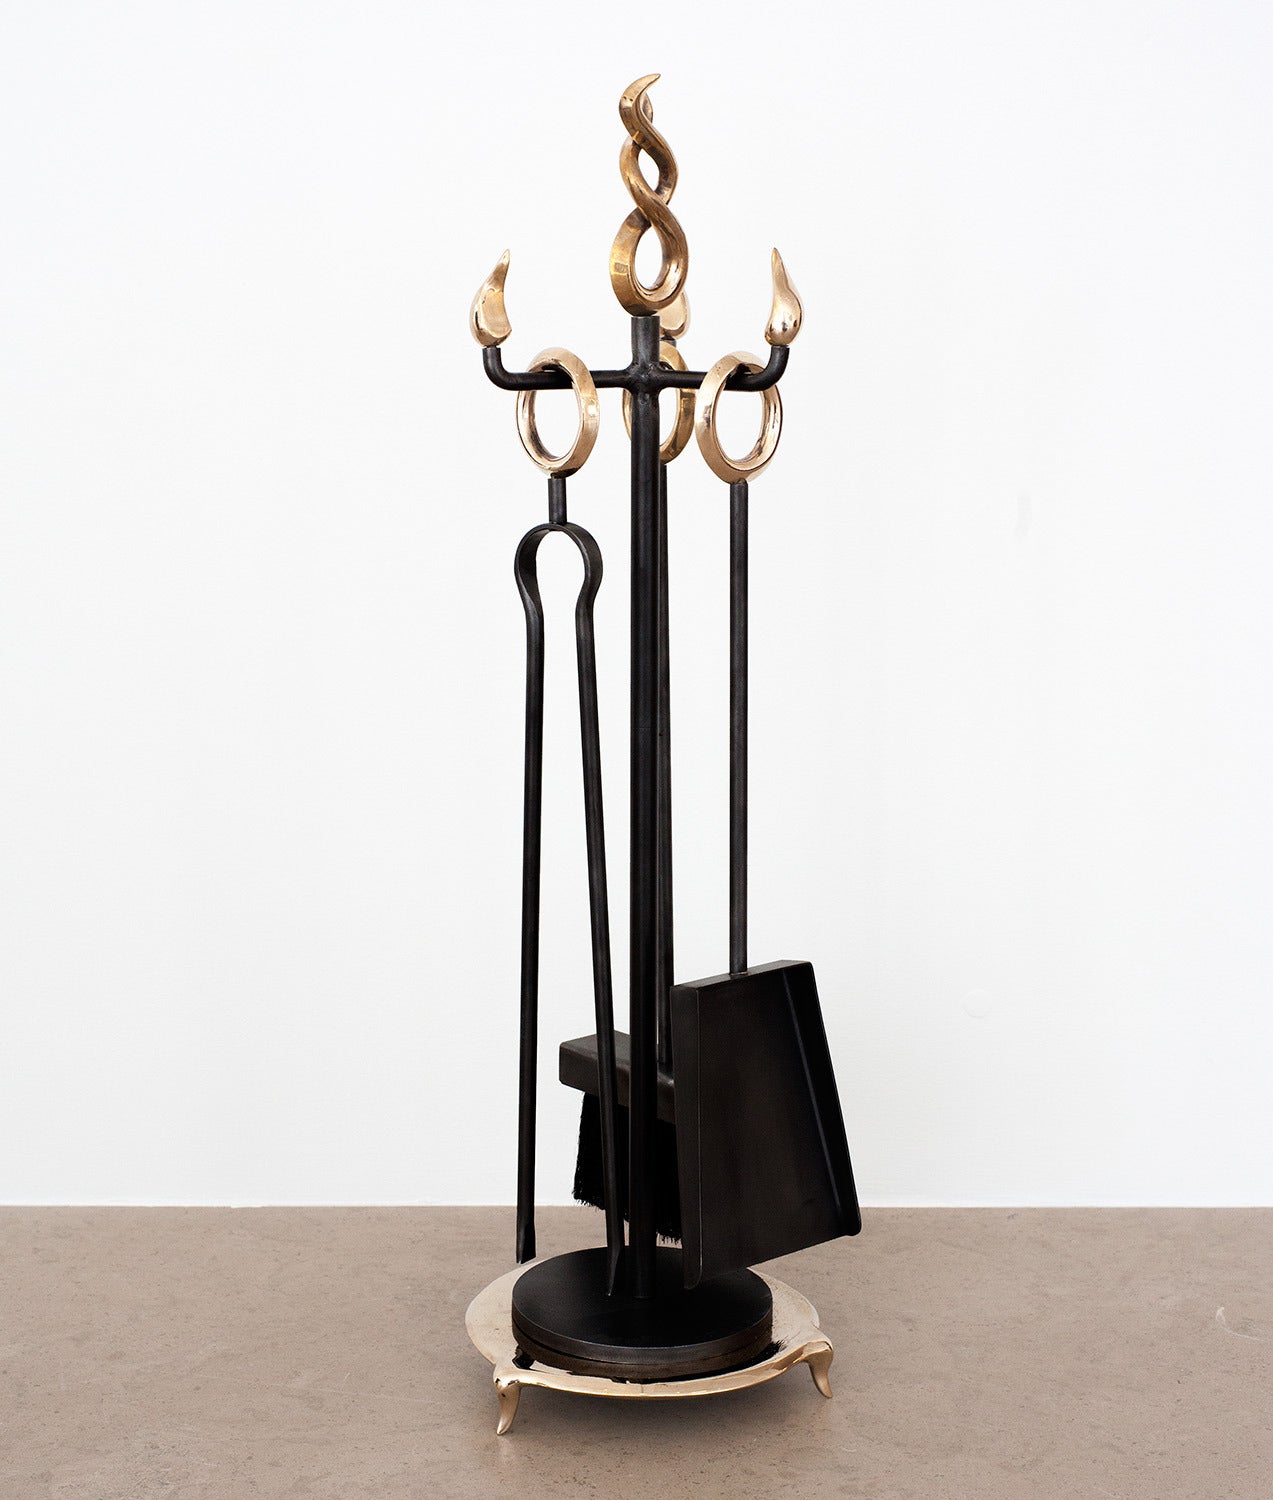 For EU buyers this piece is subject to a 20% VAT tax, which will be added to the price after the order has confirmed.  Please contact the Gallery for further information. 
A set of bronze fireplace tools with a broom, ash shovel, tongs and a